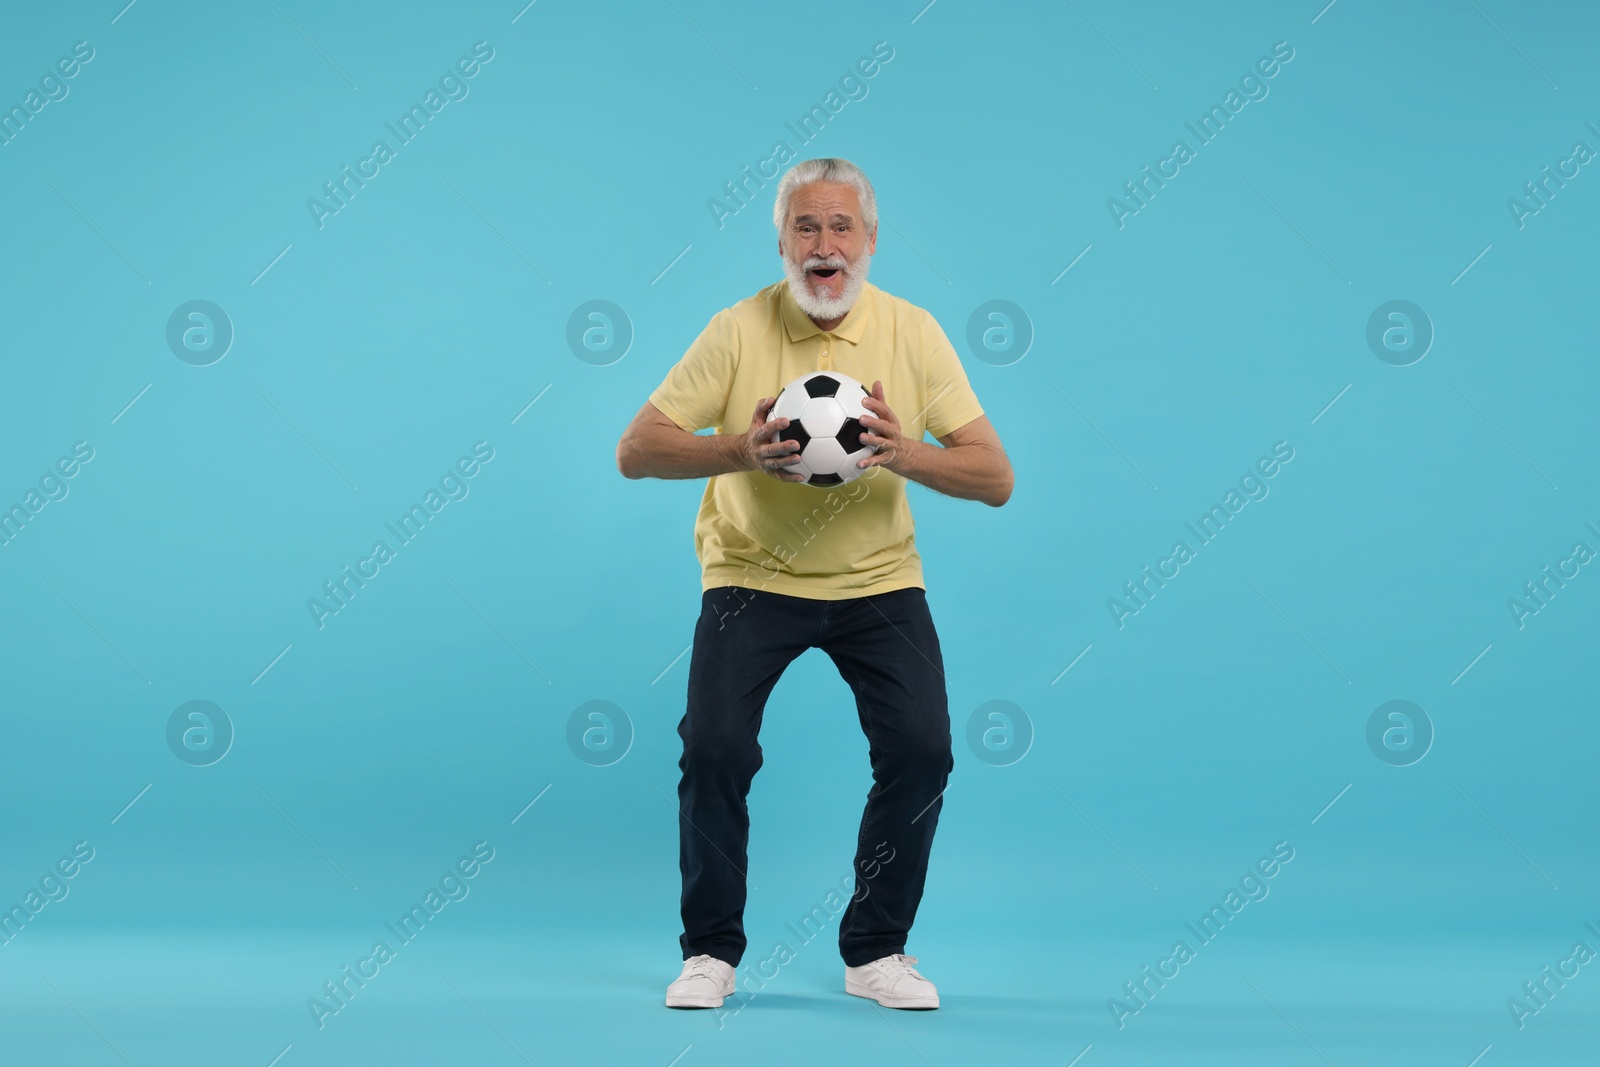 Photo of Happy senior sports fan with soccer ball on light blue background